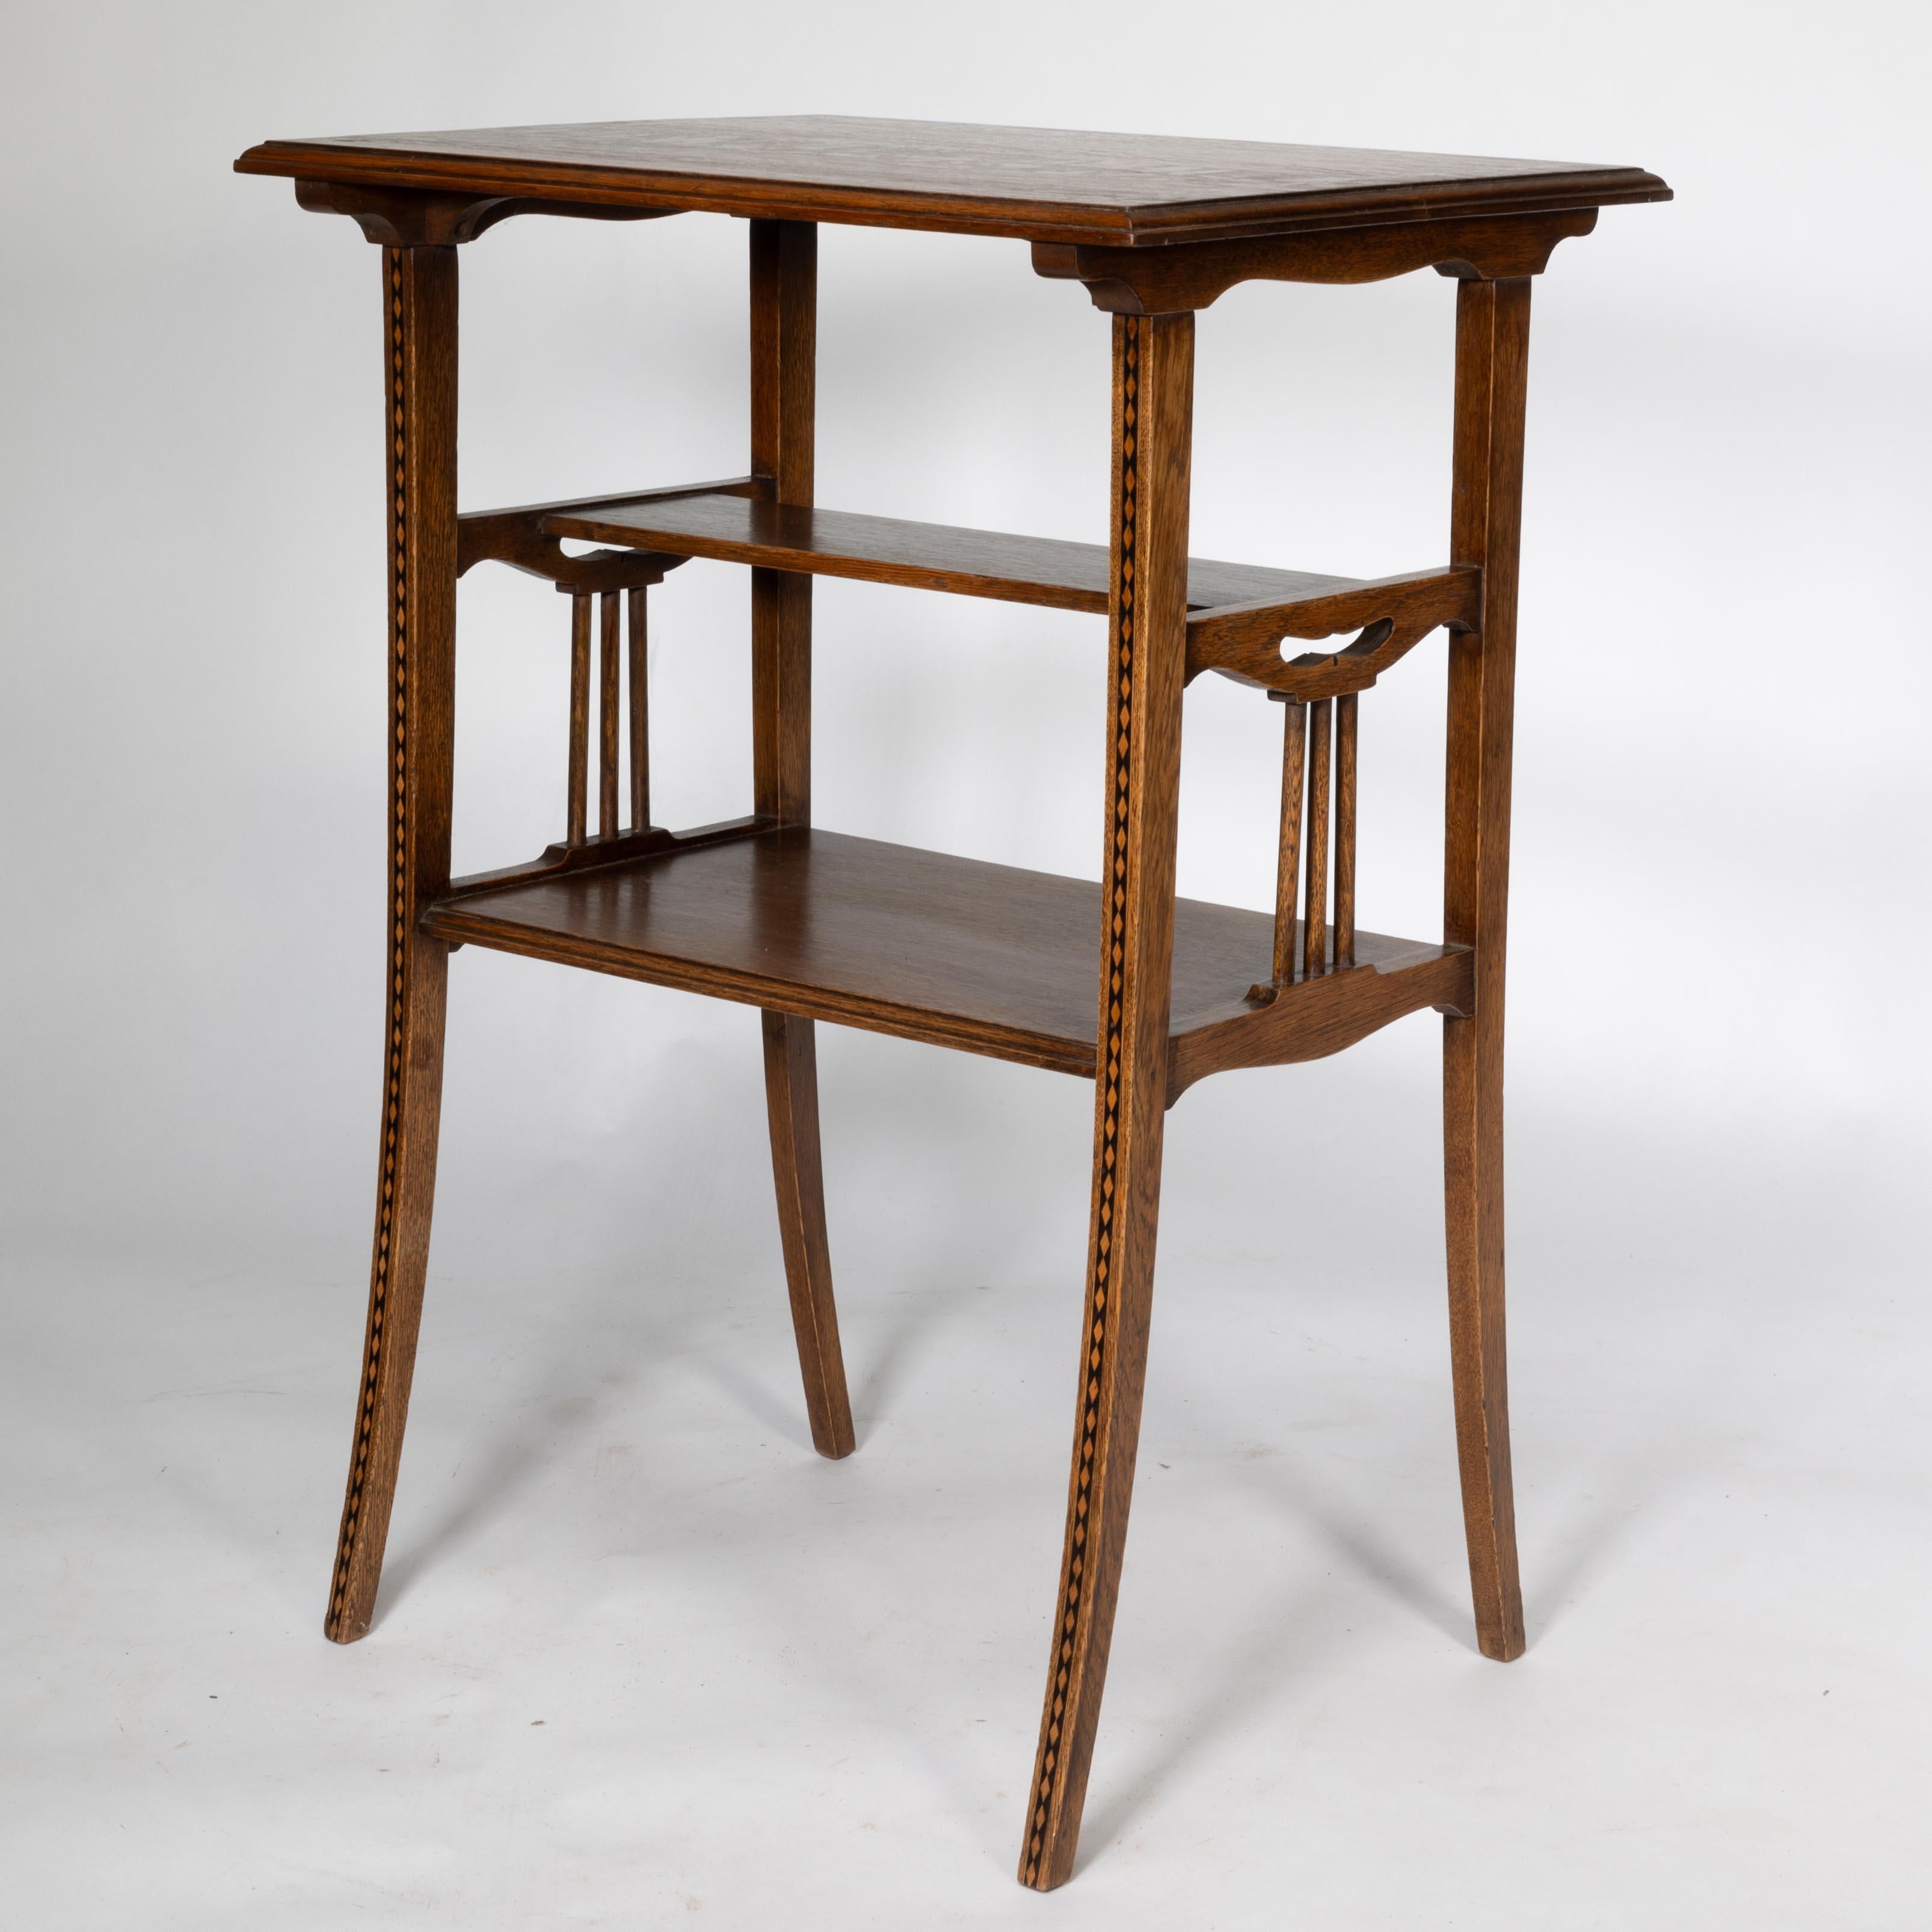 English George Walton style of. A pair of Arts & Crafts inlaid oak side table For Sale